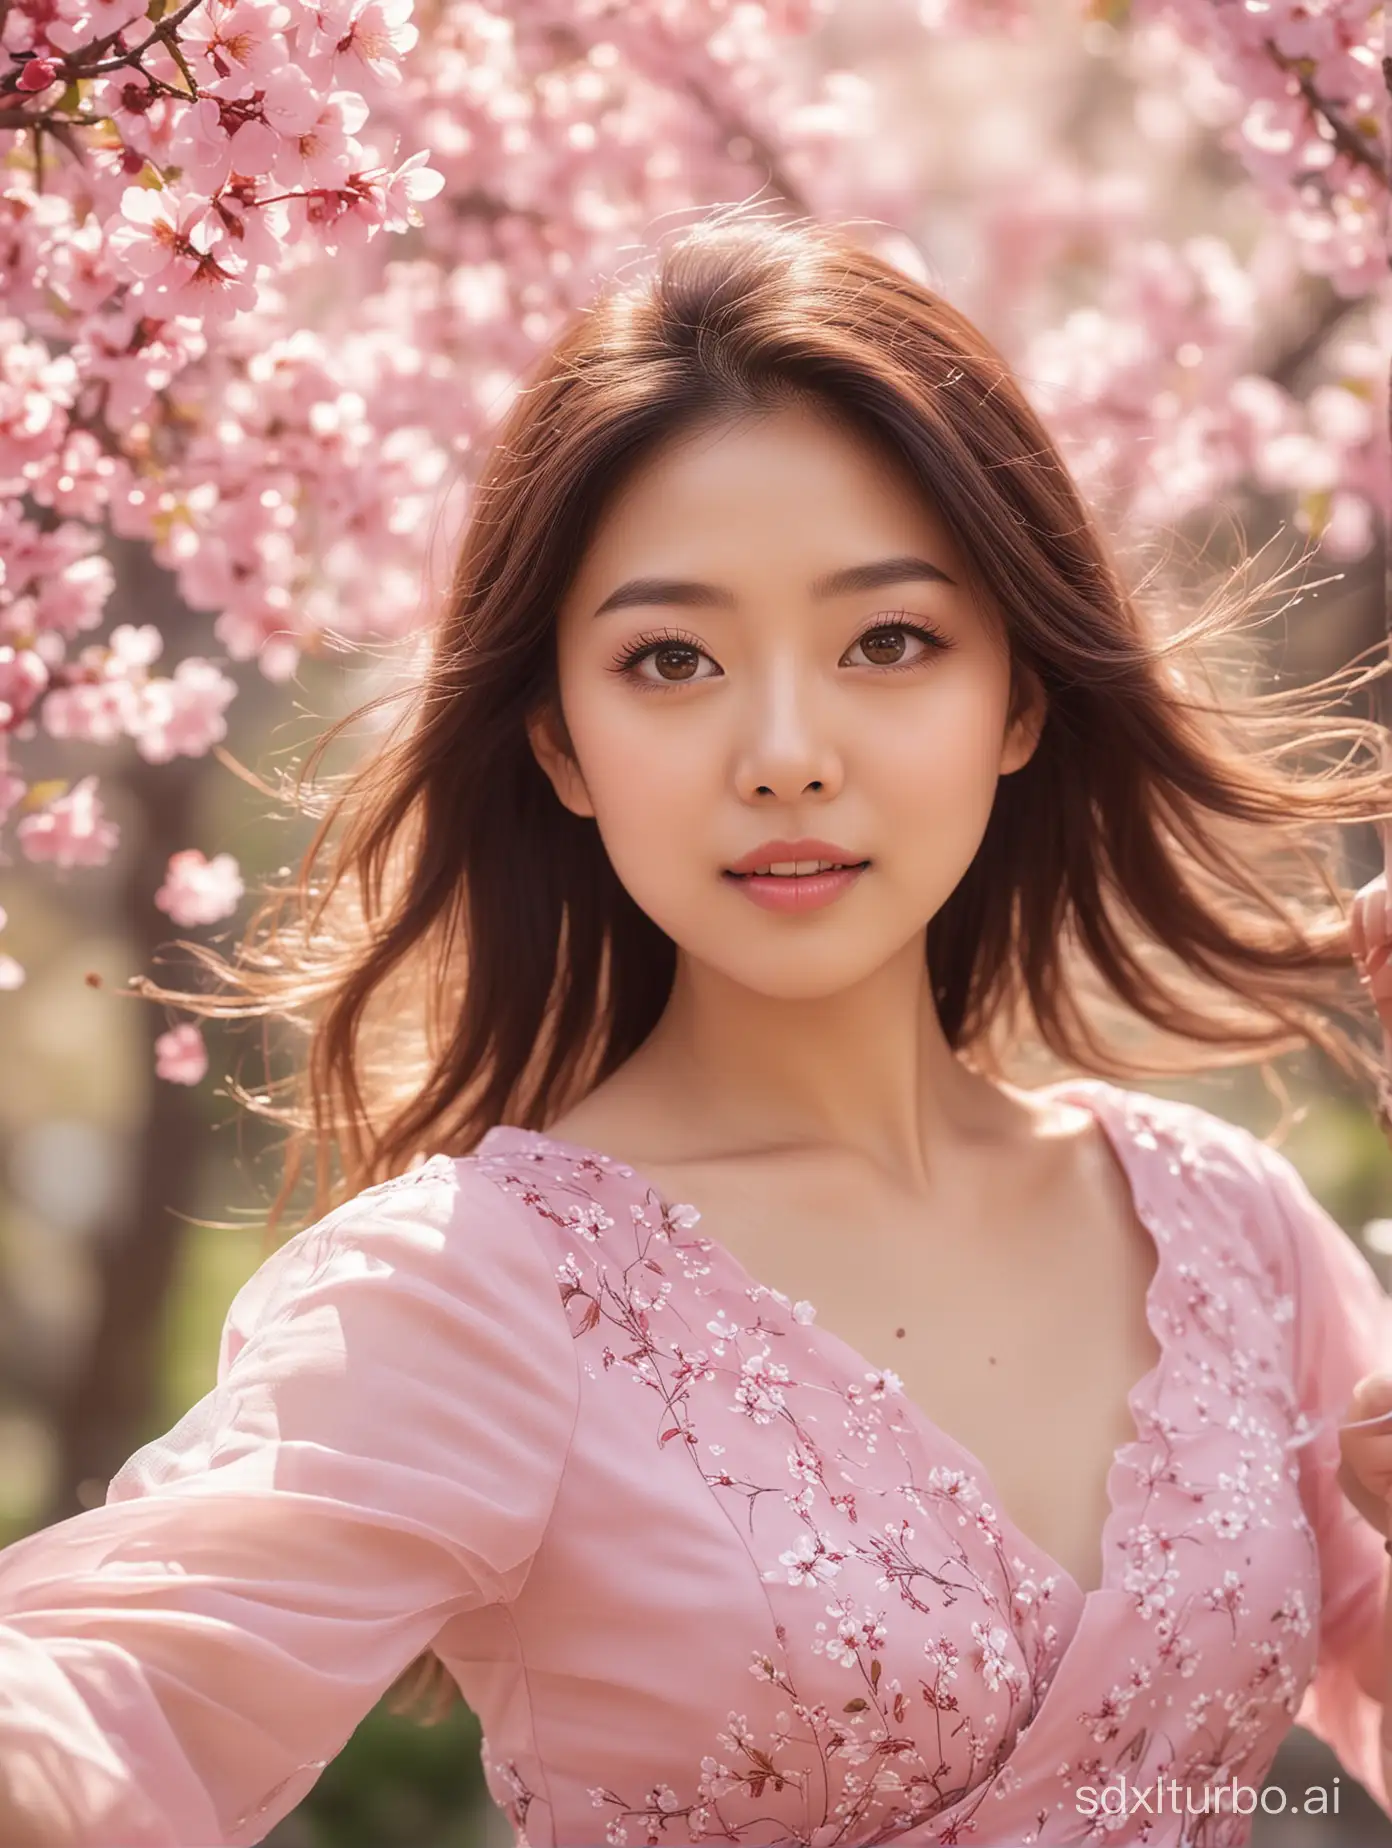 An elegant Asian girl wearing a pink dress, close-up shot, big eyes, delicate features, dancing in the cherry blossom blooming garden, petals falling in the wind, sunlight shining on her hair through the leaves, romantic spring atmosphere, vivid dynamic capture, dreamy background blur effect, fine facial features, high dynamic range colors, full body photos